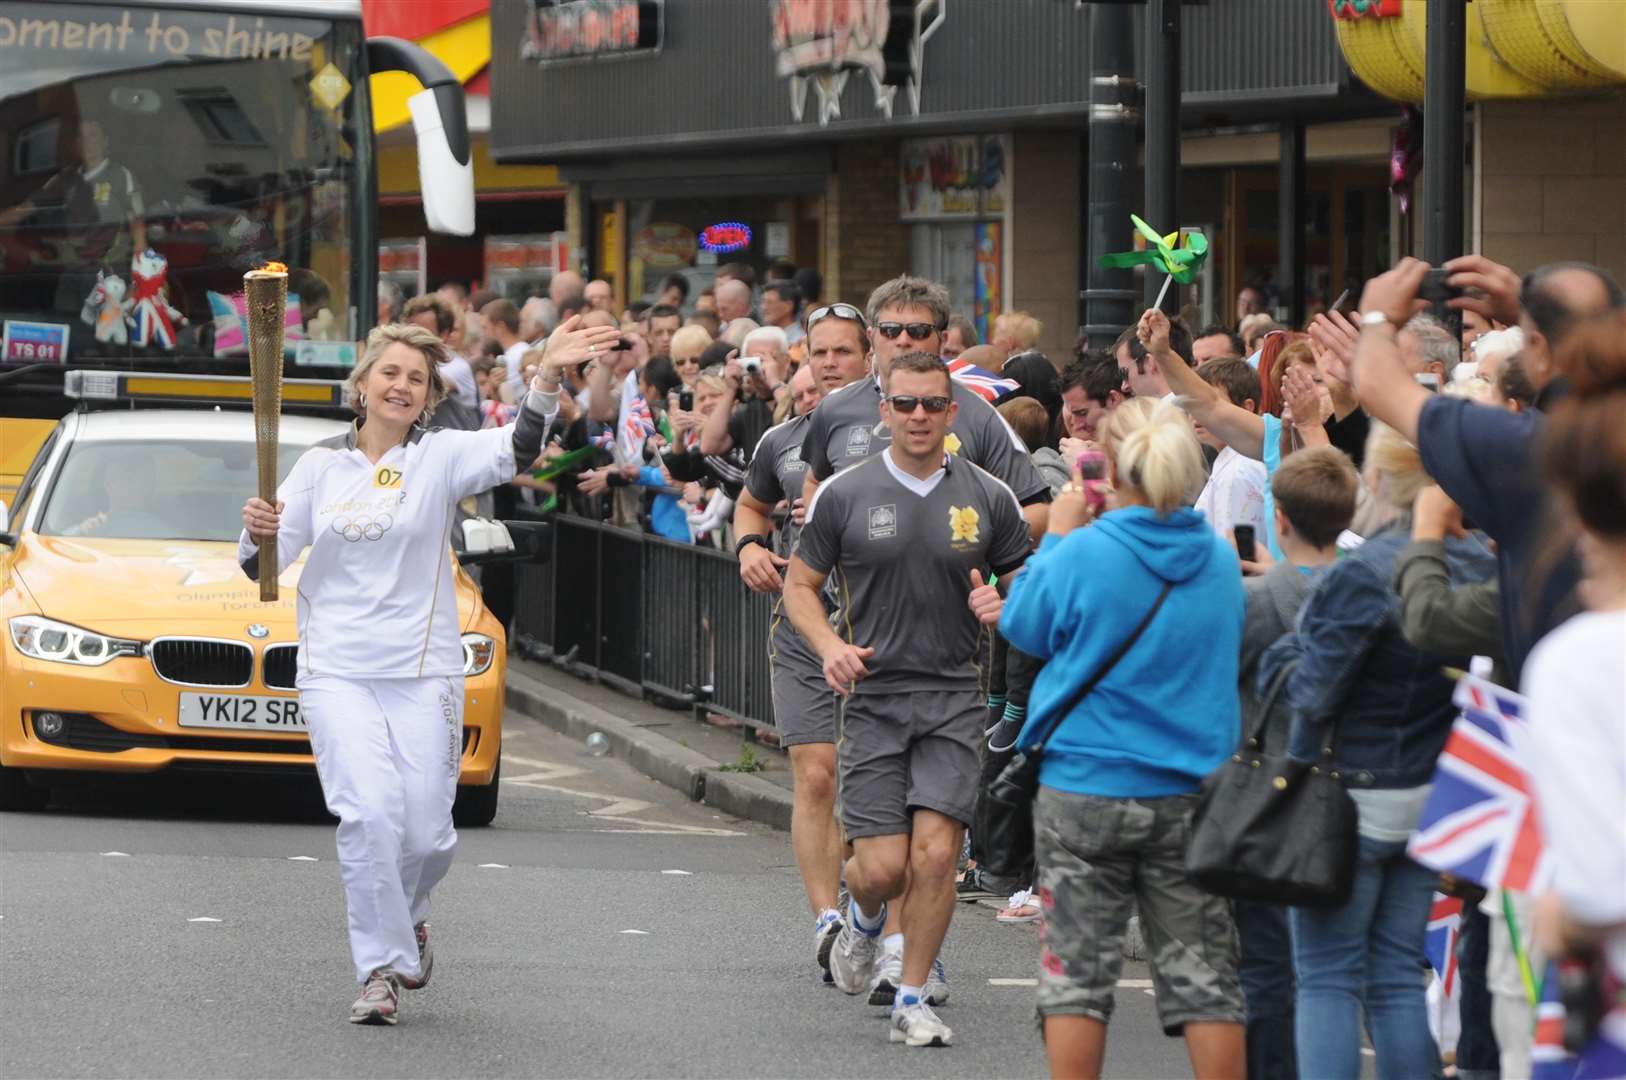 Thousands turned out to see the Olympic flame be carried through Kent in 2012